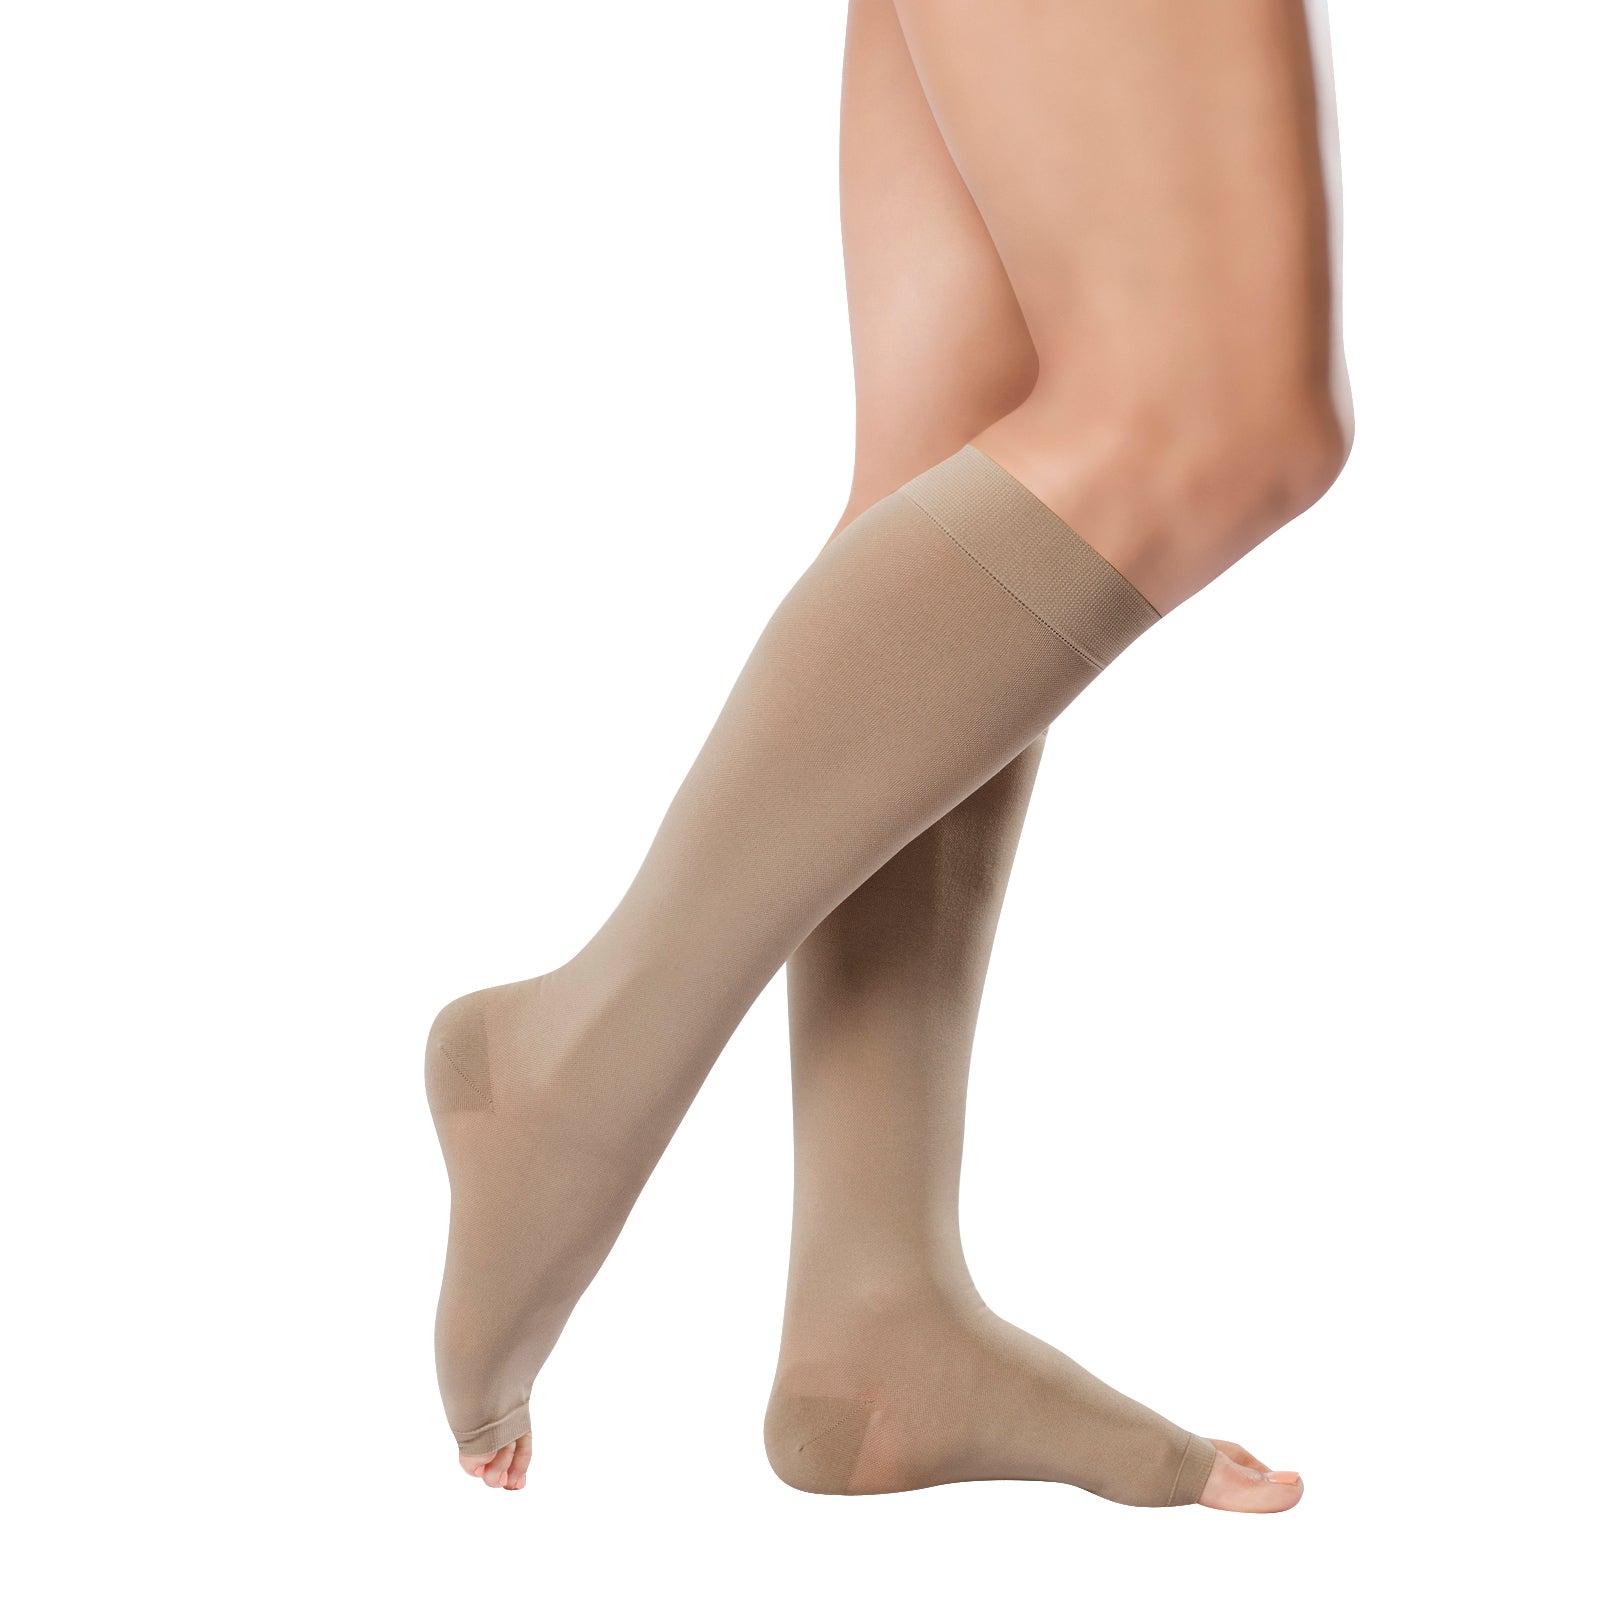 Pin on compression stockings